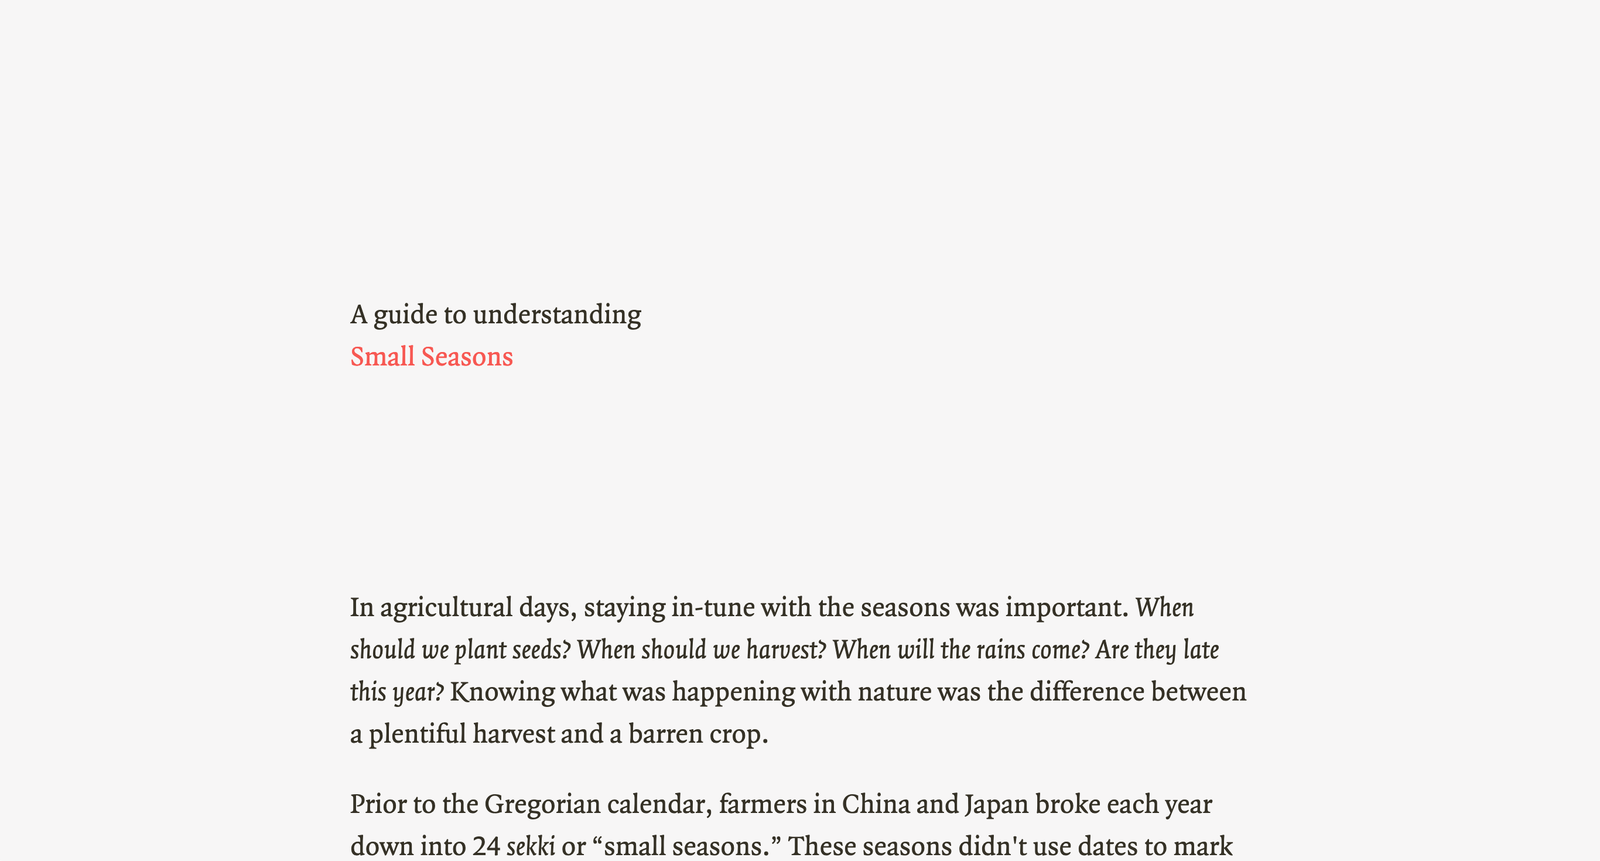 a screenshot of the website smallseasons.guide, showing textual intro